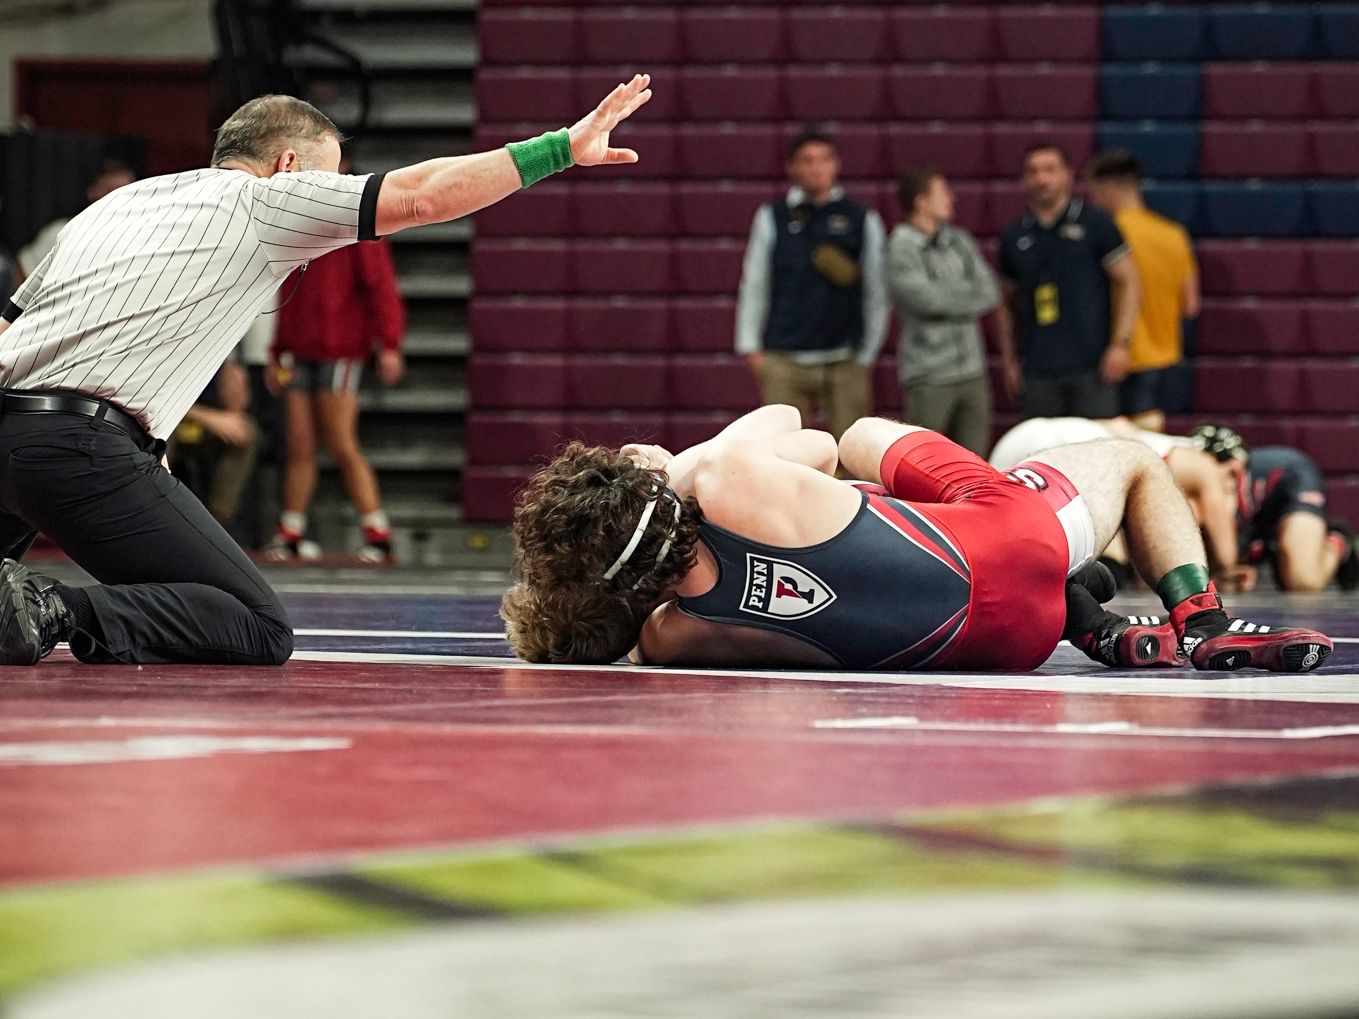 Meet the Ivy League grapplers making wrestling a family affair at Penn